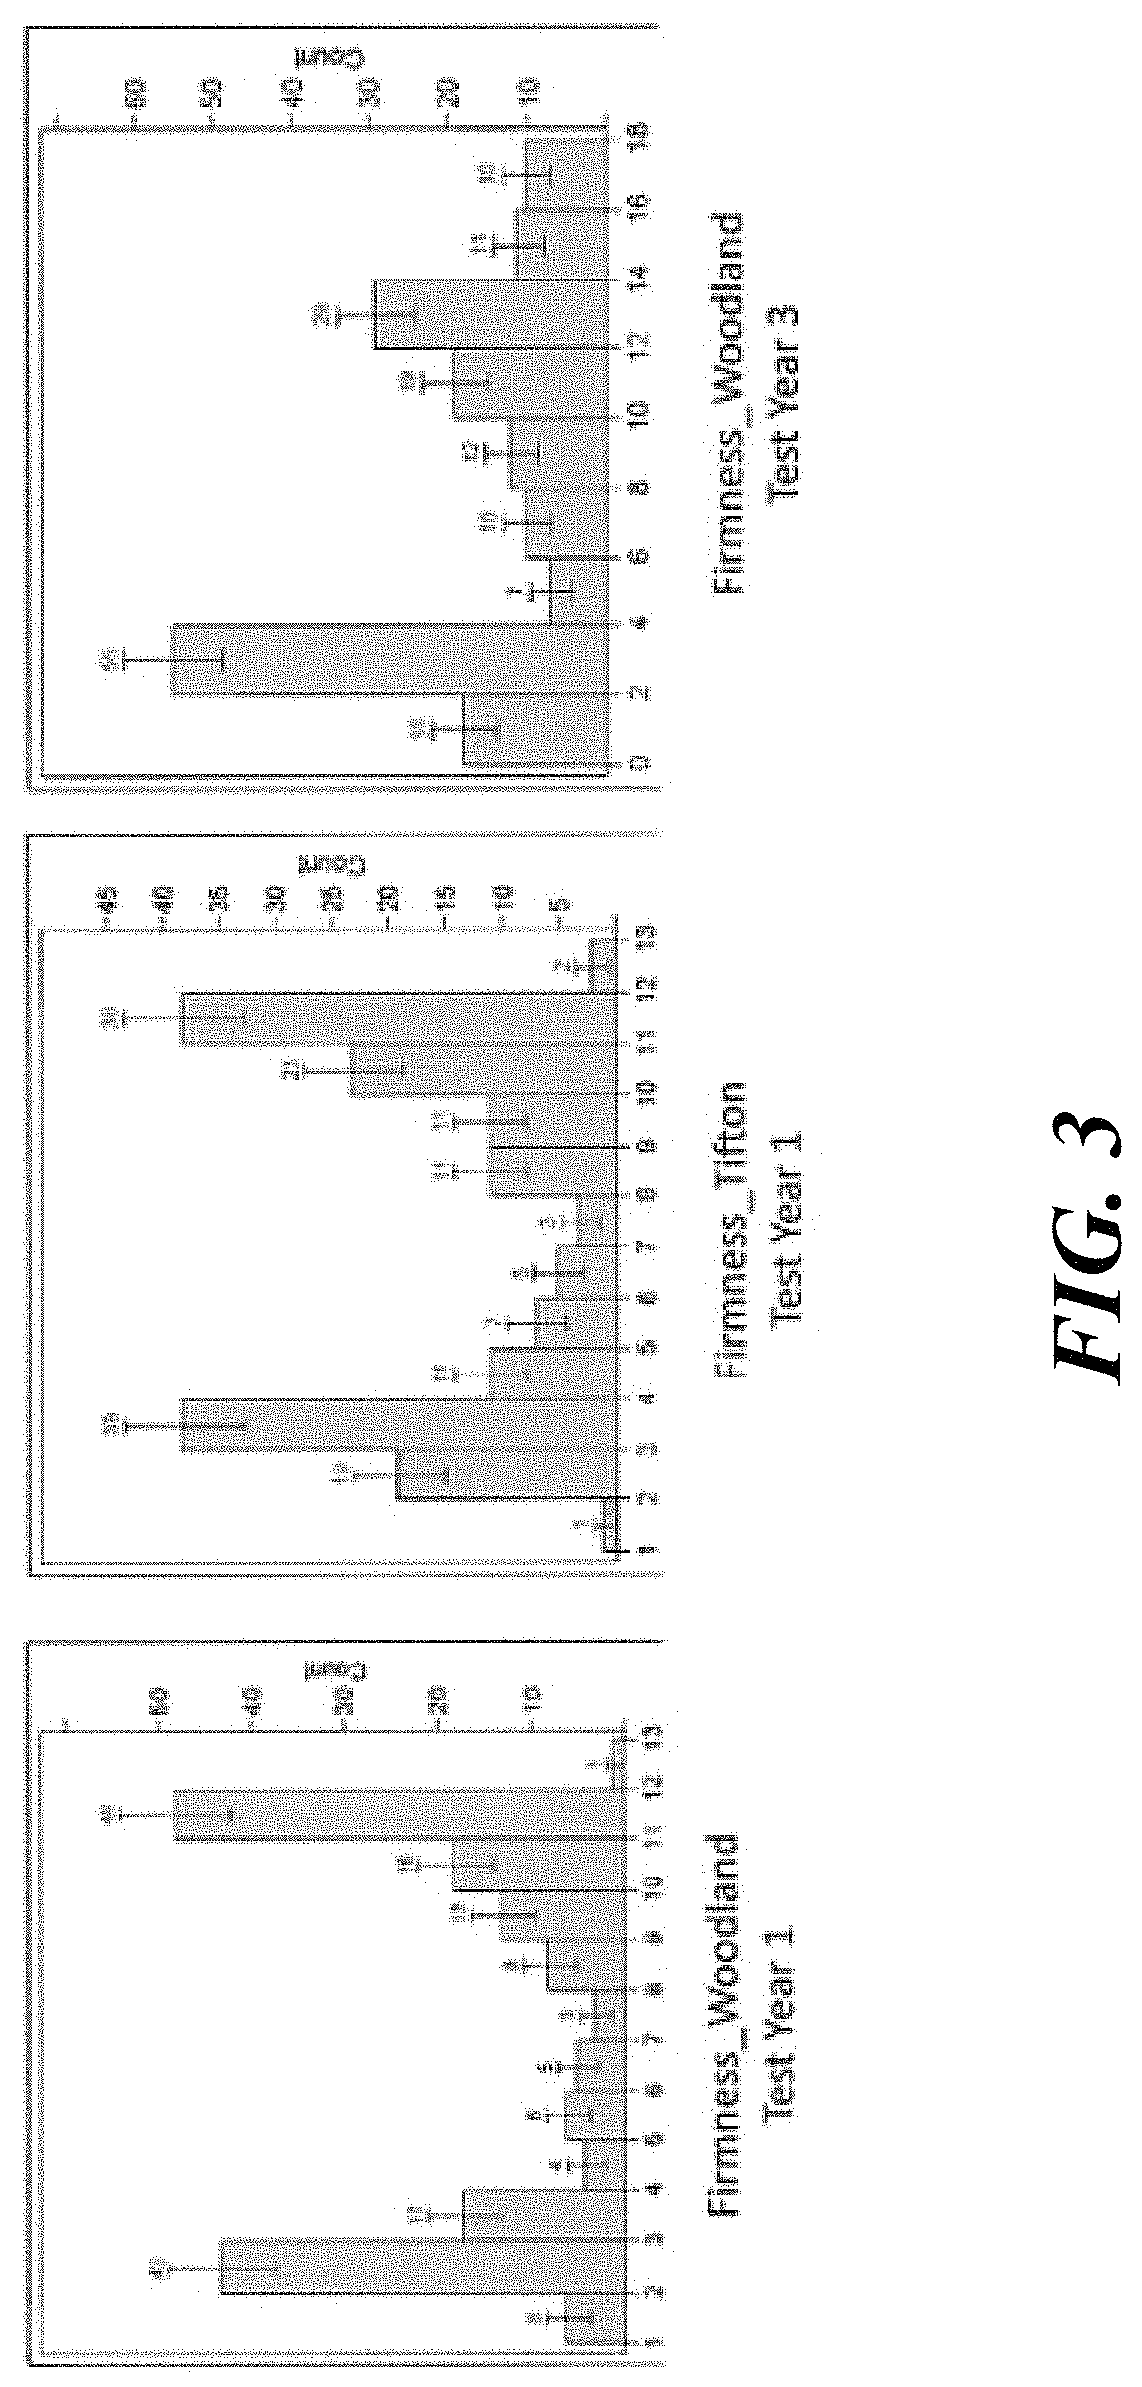 Methods and compositions for watermelon with improved processing qualities and firmness